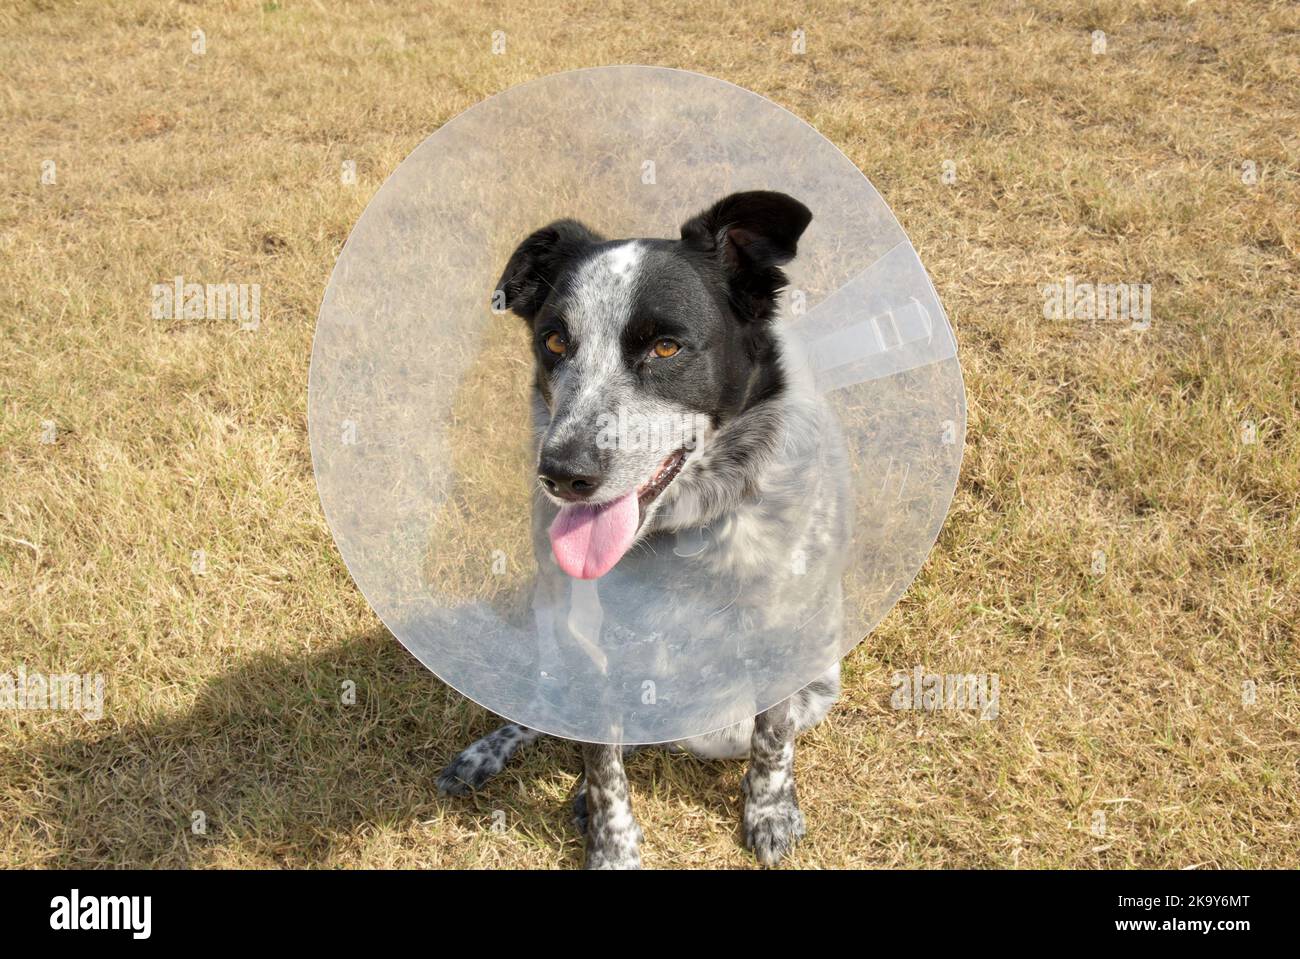 Black and white spotted dog sitting on dry grass, wearing a medical collar, looking at the viewer Stock Photo